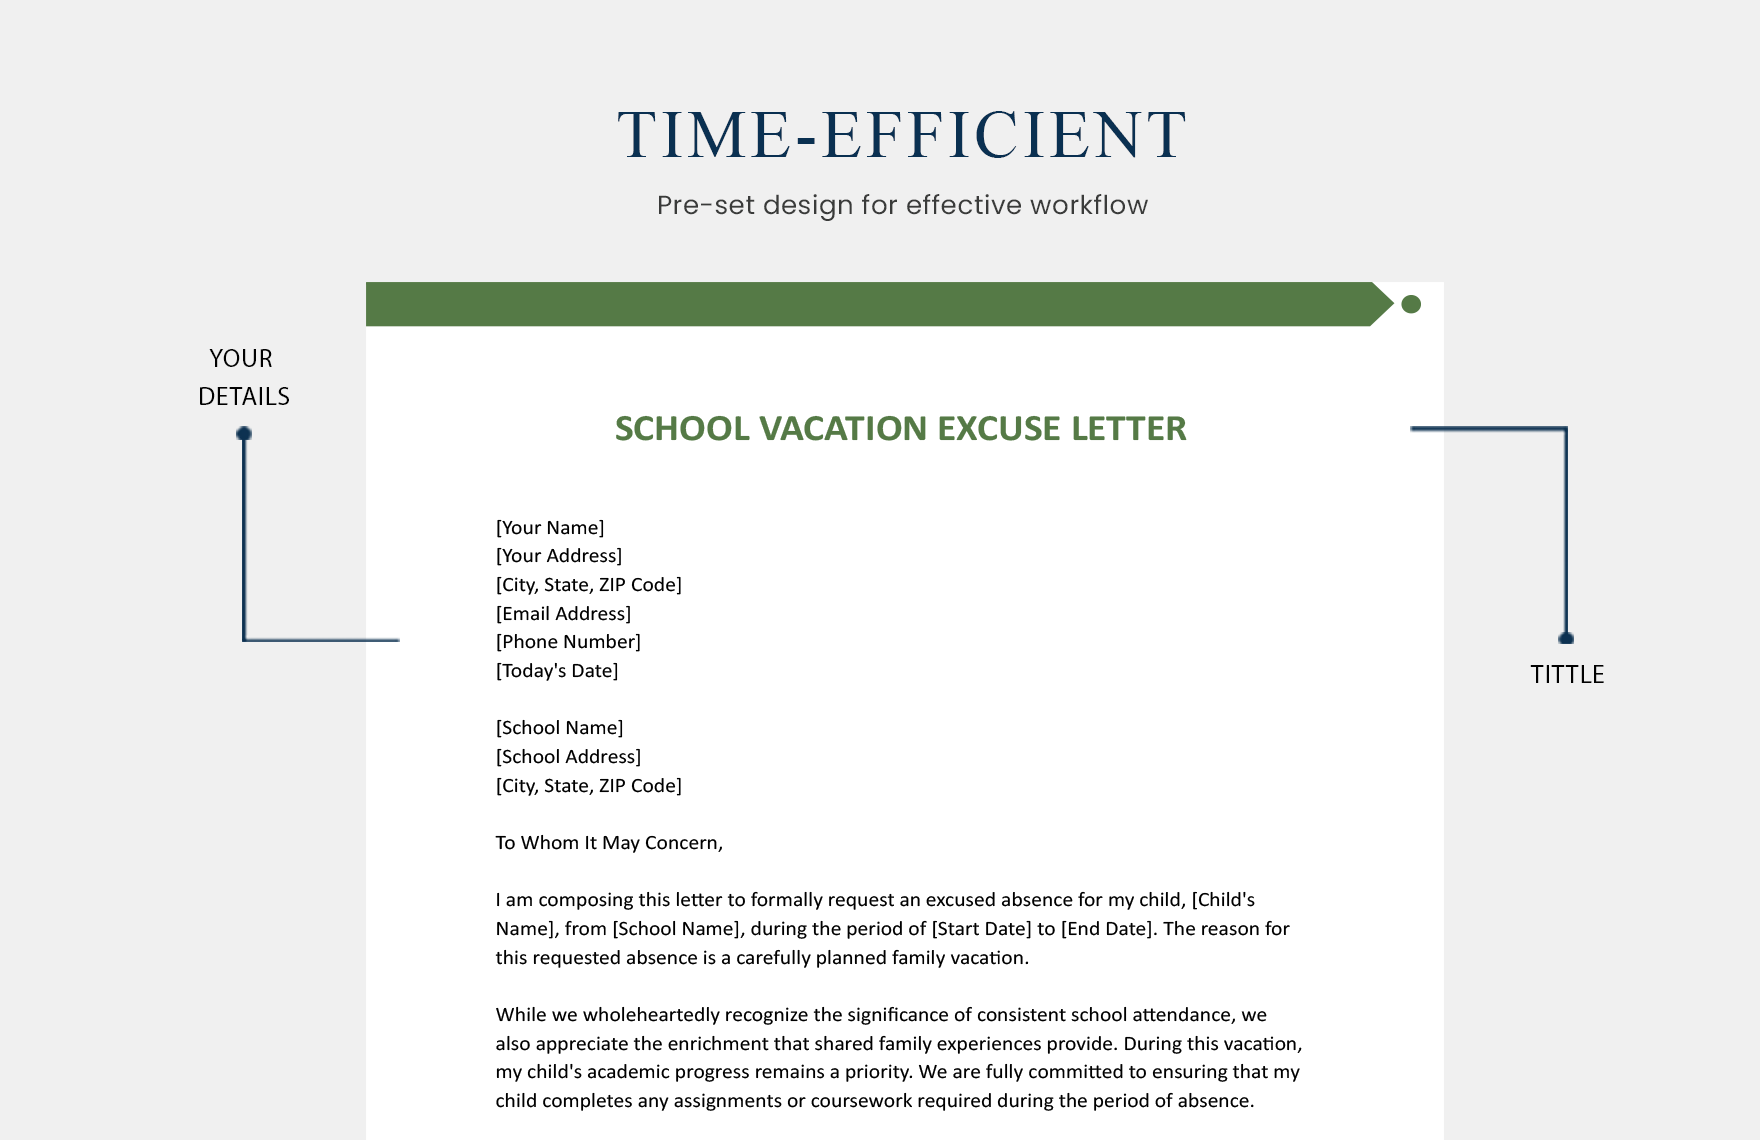 School Vacation Excuse Letter